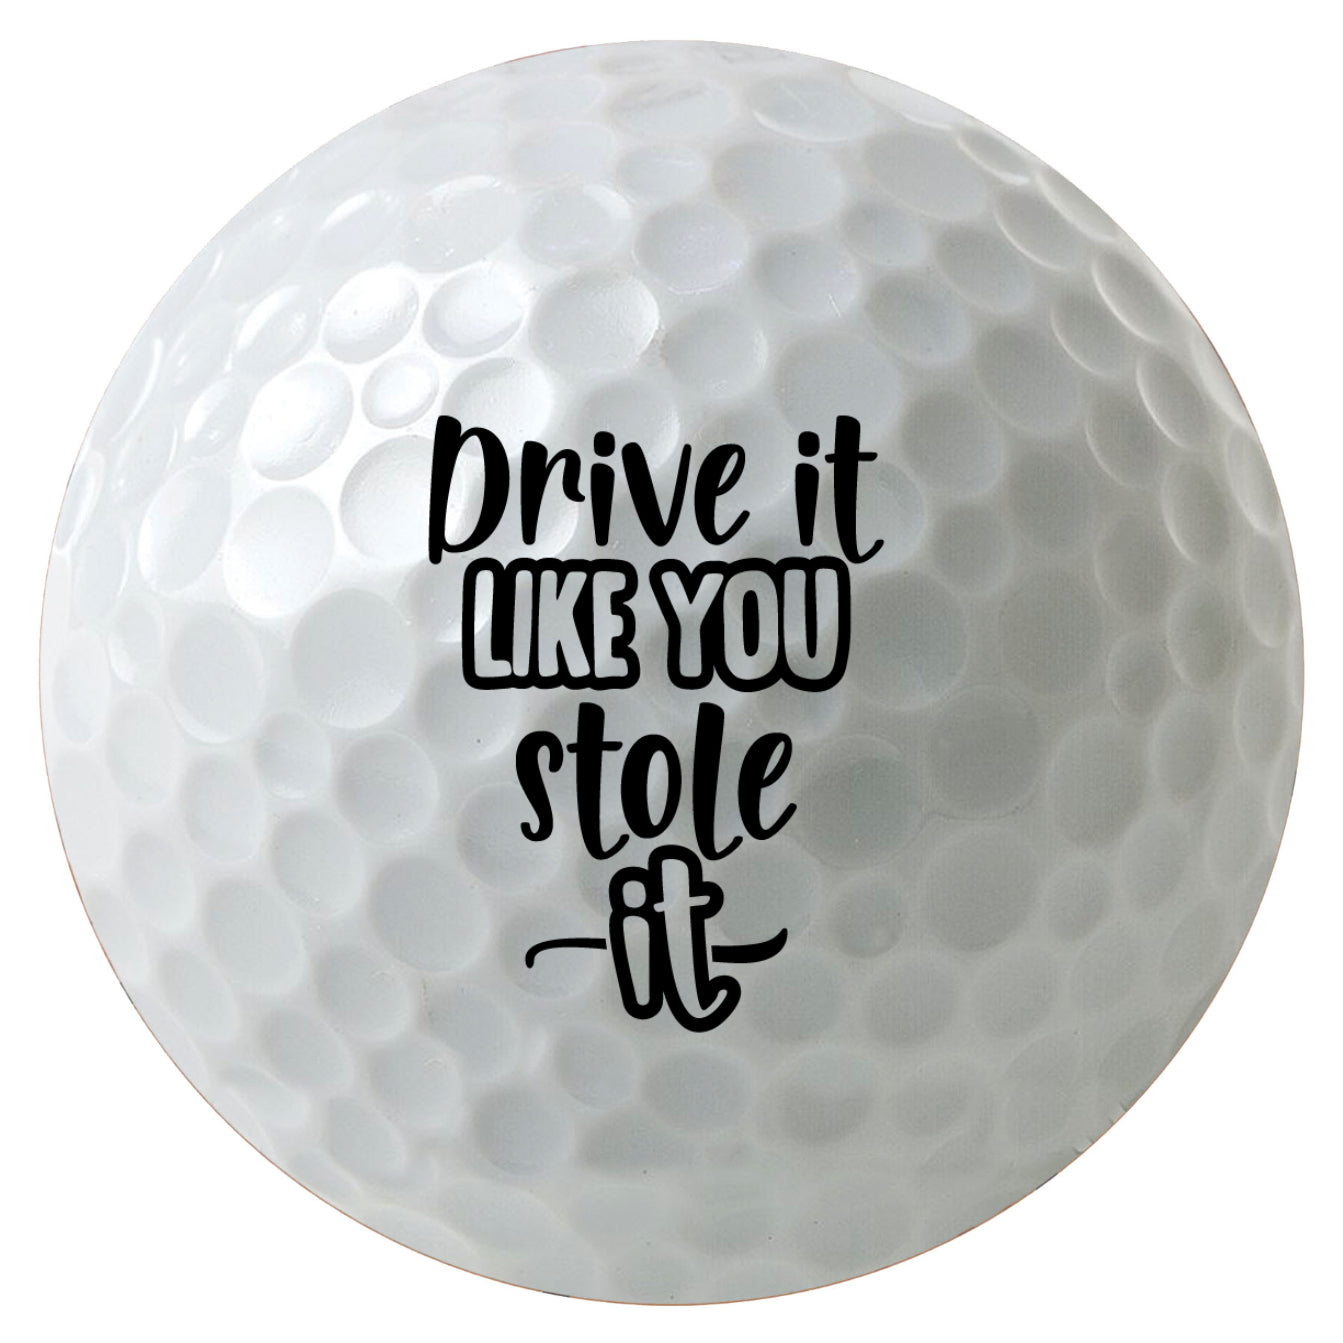 Drive it Like You Stole It Golf Balls, 3-Pack Printed White Golf Balls